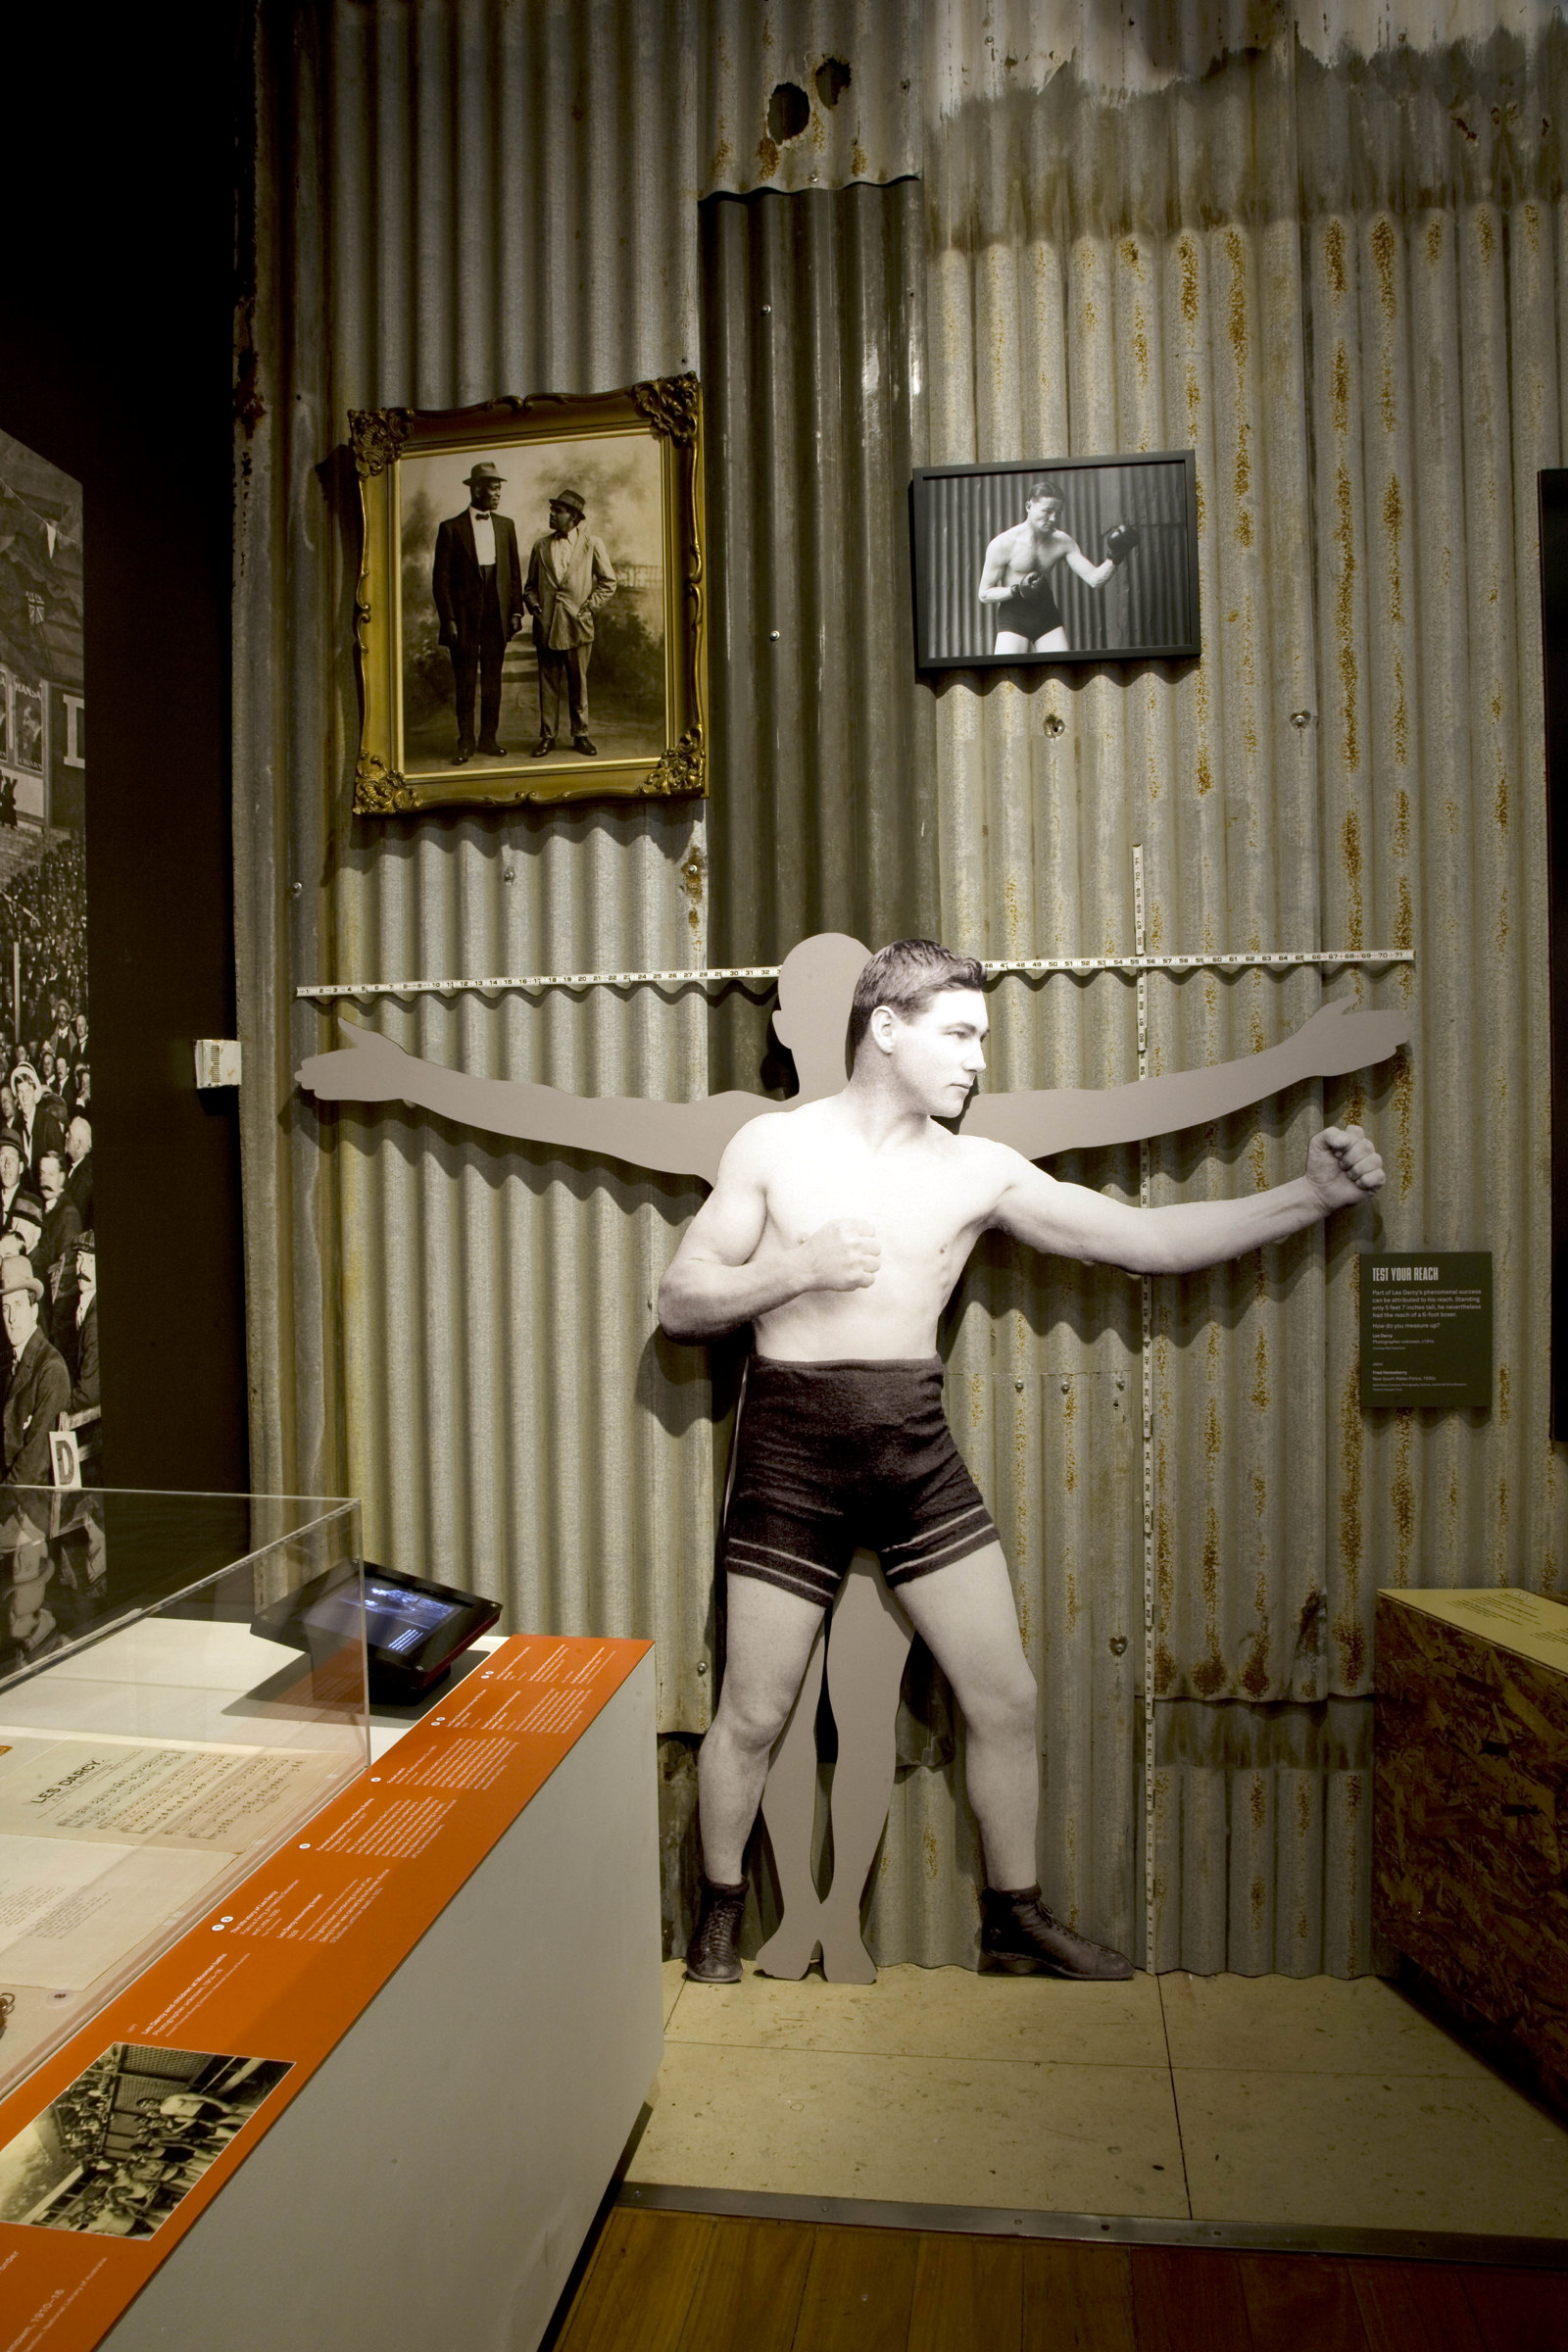 Wall lined with corrugated iron and cut out figures of boxers.